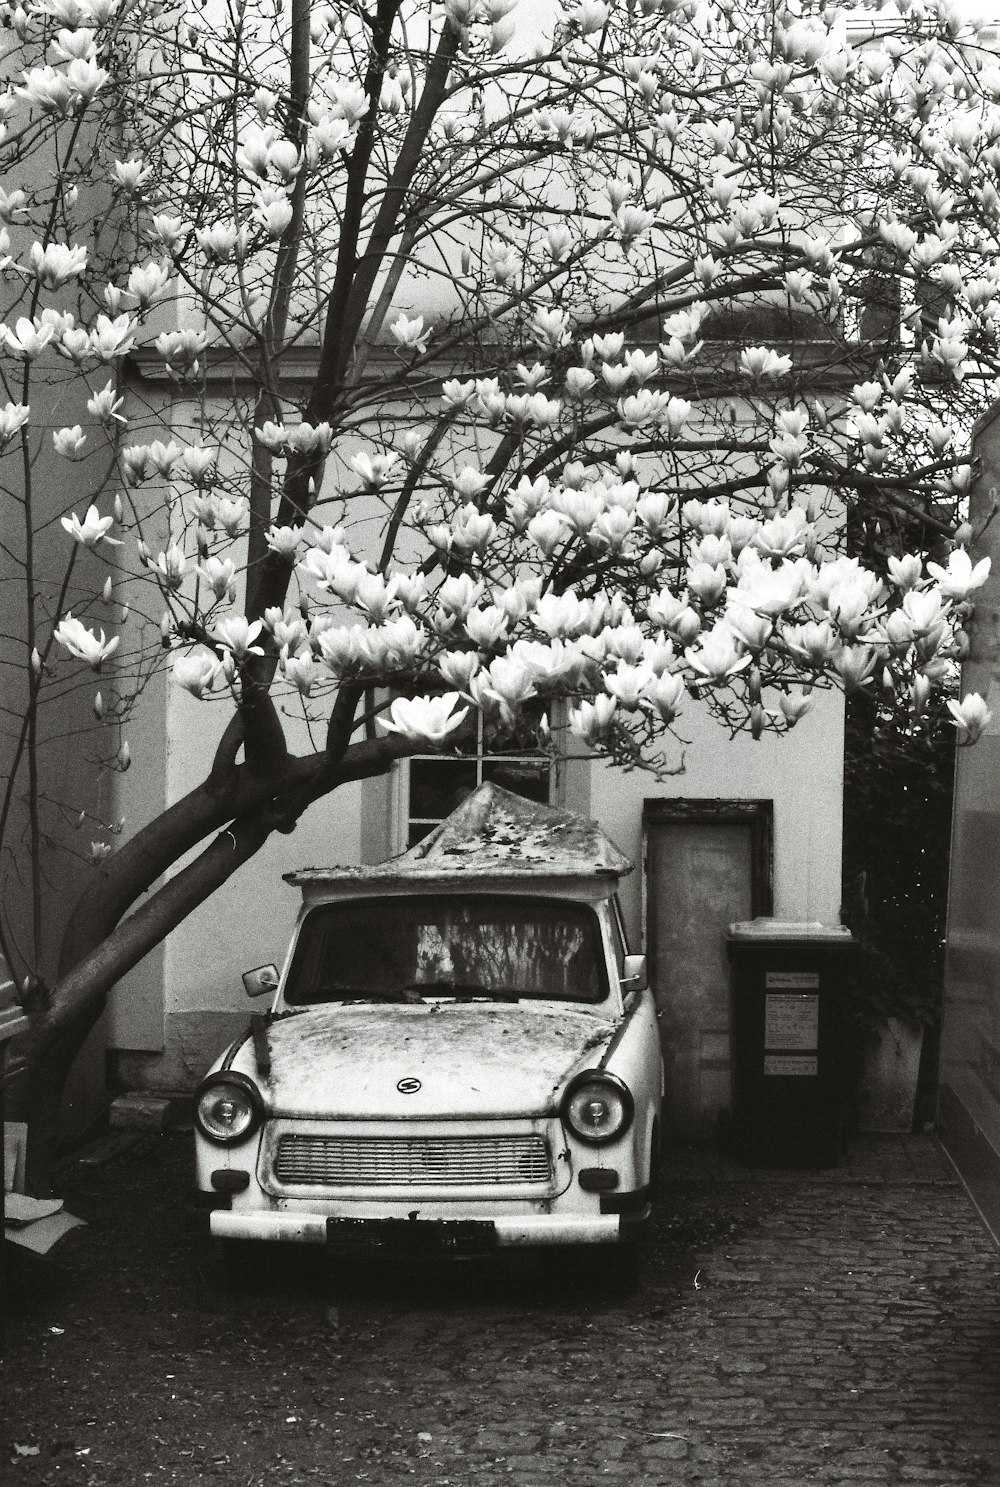 a car parked in front of a tree with white flowers